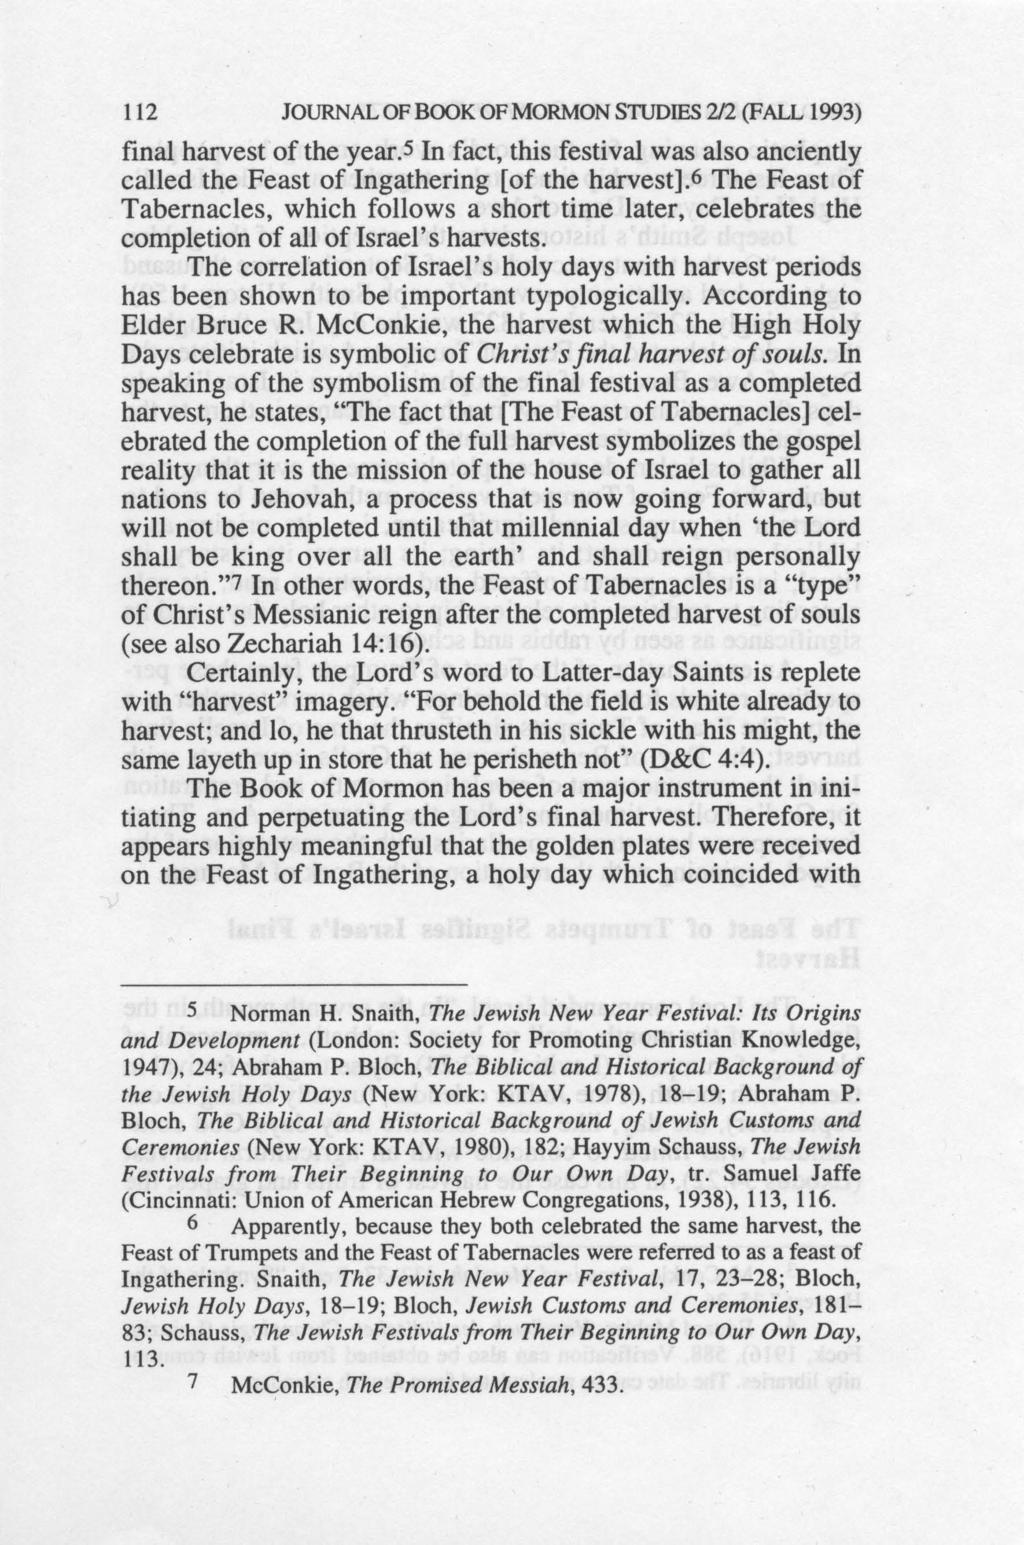 112 JOURNAL OF BOOK OF MORMON STUDIES 212 (FALL 1993) final harvest of the year.5 In fact, this festival was also anciently called the Feast of Ingathering [of the harvest].